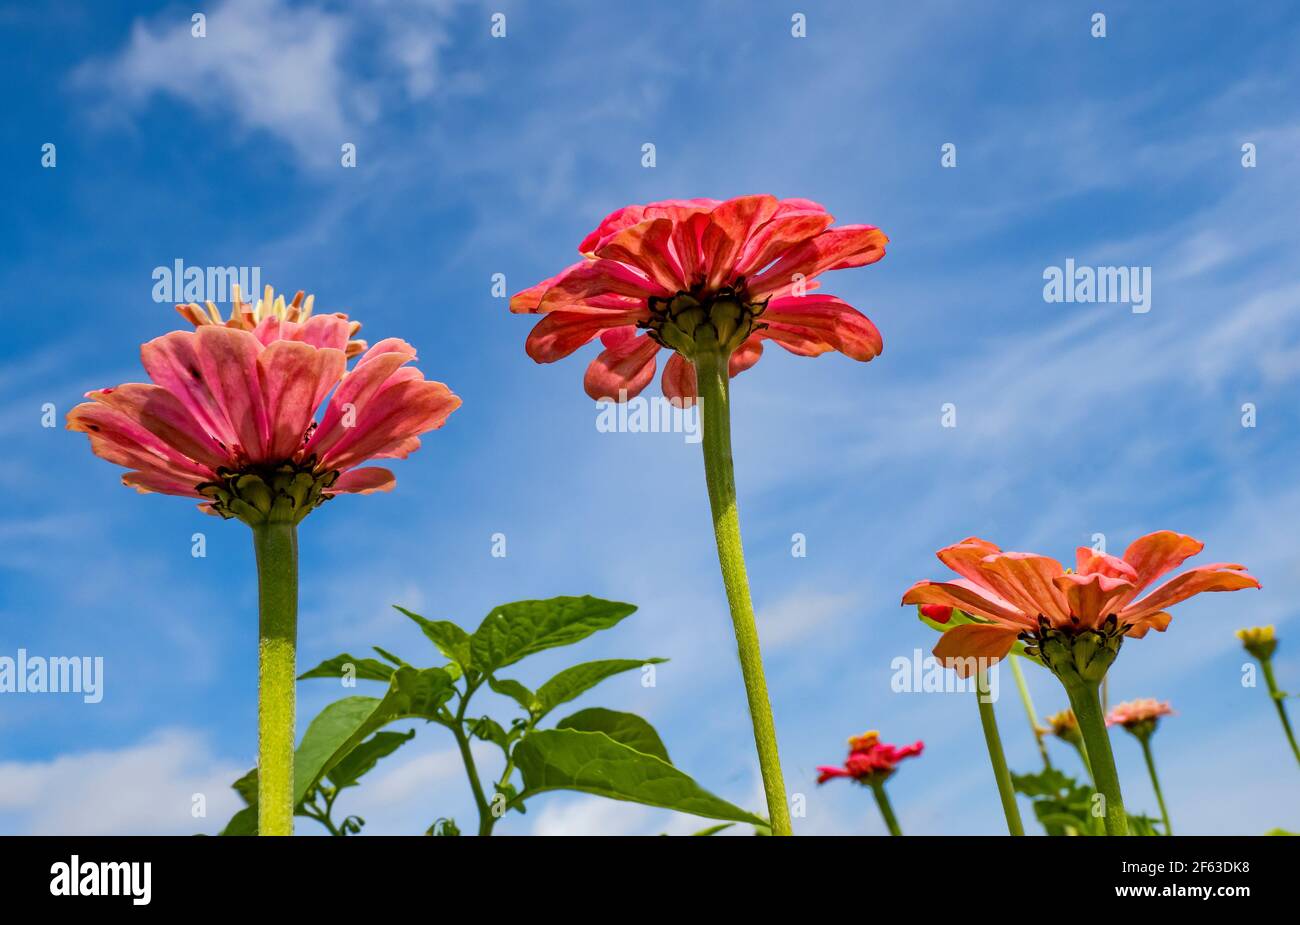 Three reddish pink Zinnias looking up at a blue sky in the background Stock Photo